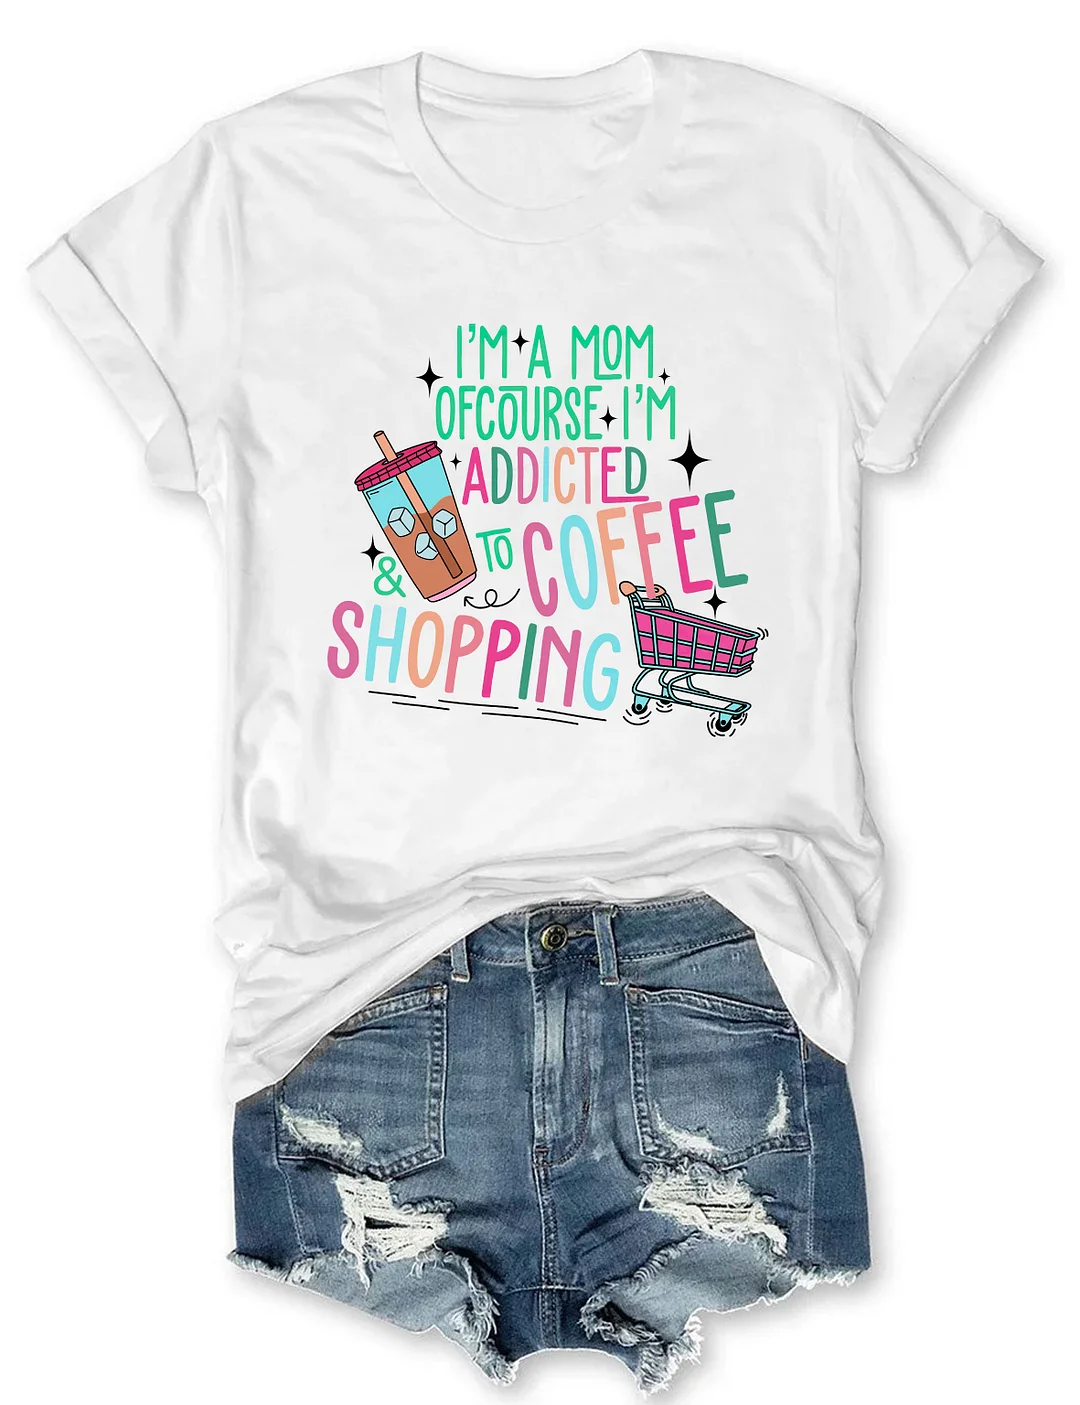 I'm A Mom Of Course I’M Addicted To Coffee & Shopping T-shirt